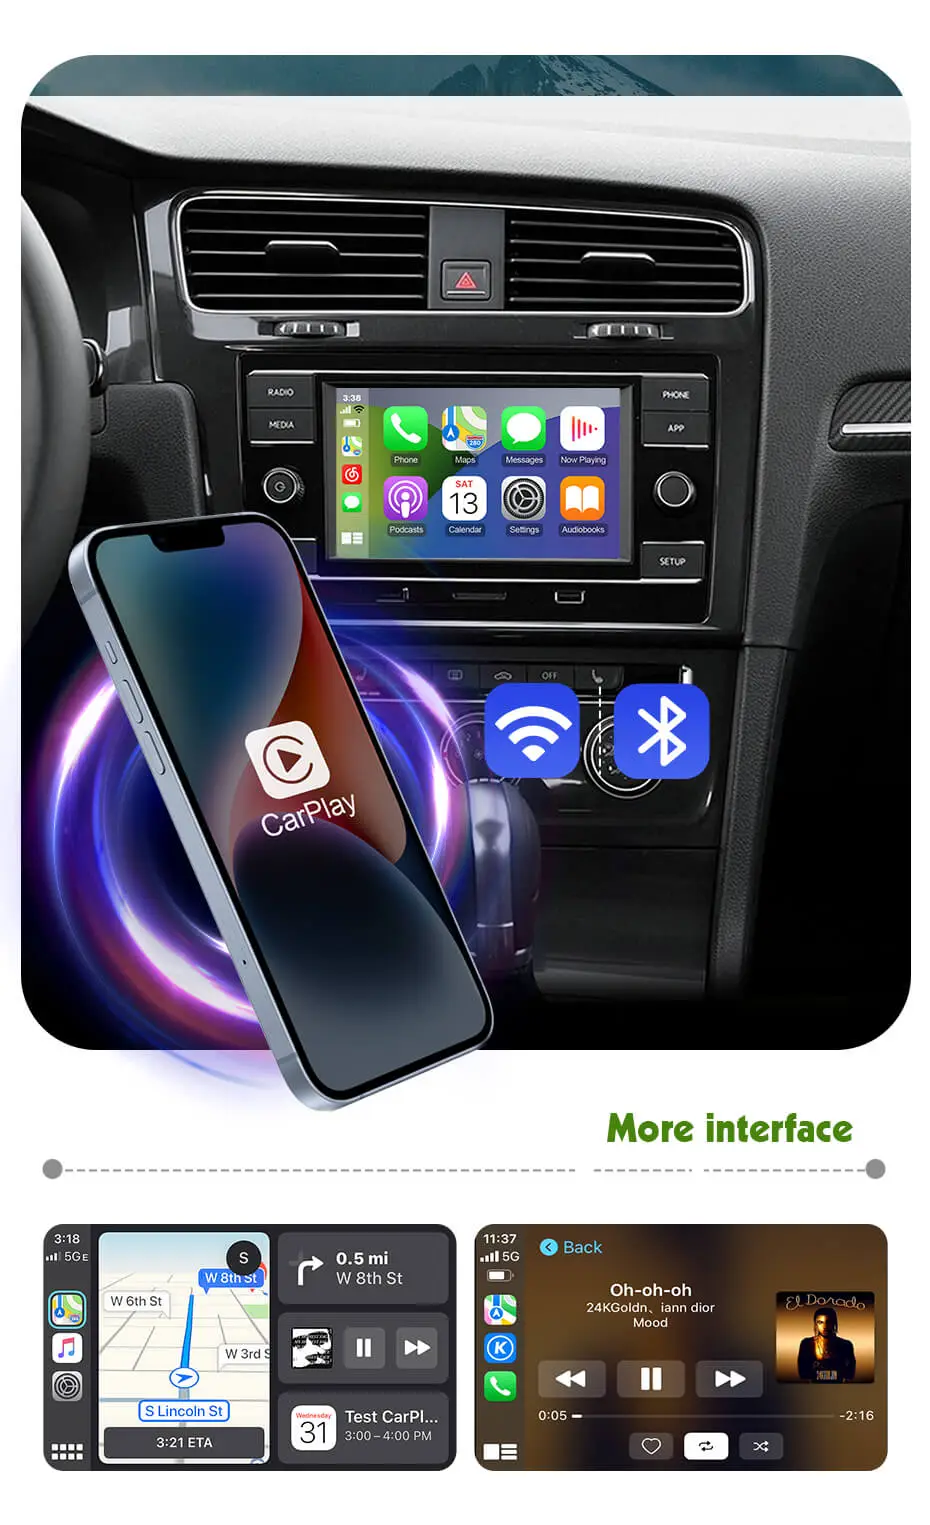 CarlinKit 5.0 & CarlinKit 4.0 Wireless CarPlay Android Auto  Music  Spotify Auto For Audi Golf Peugeot Mercedes volkswagen